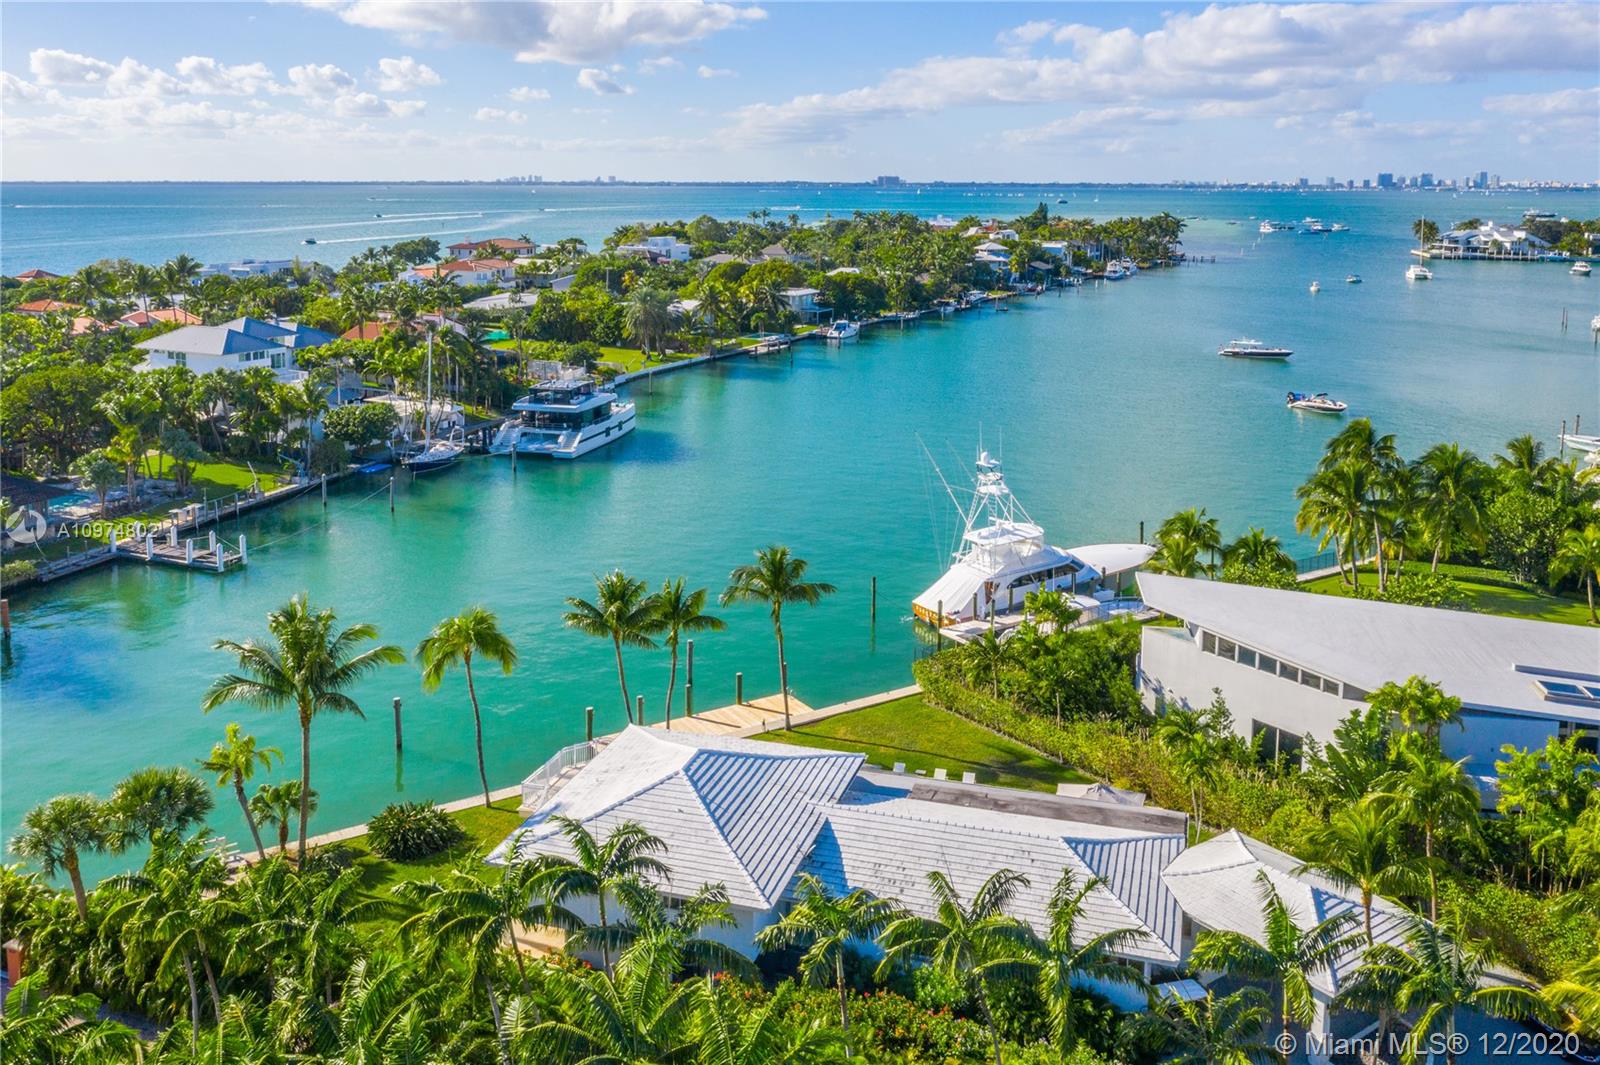 Want to know what’s happening in The Key Biscayne Housing Market